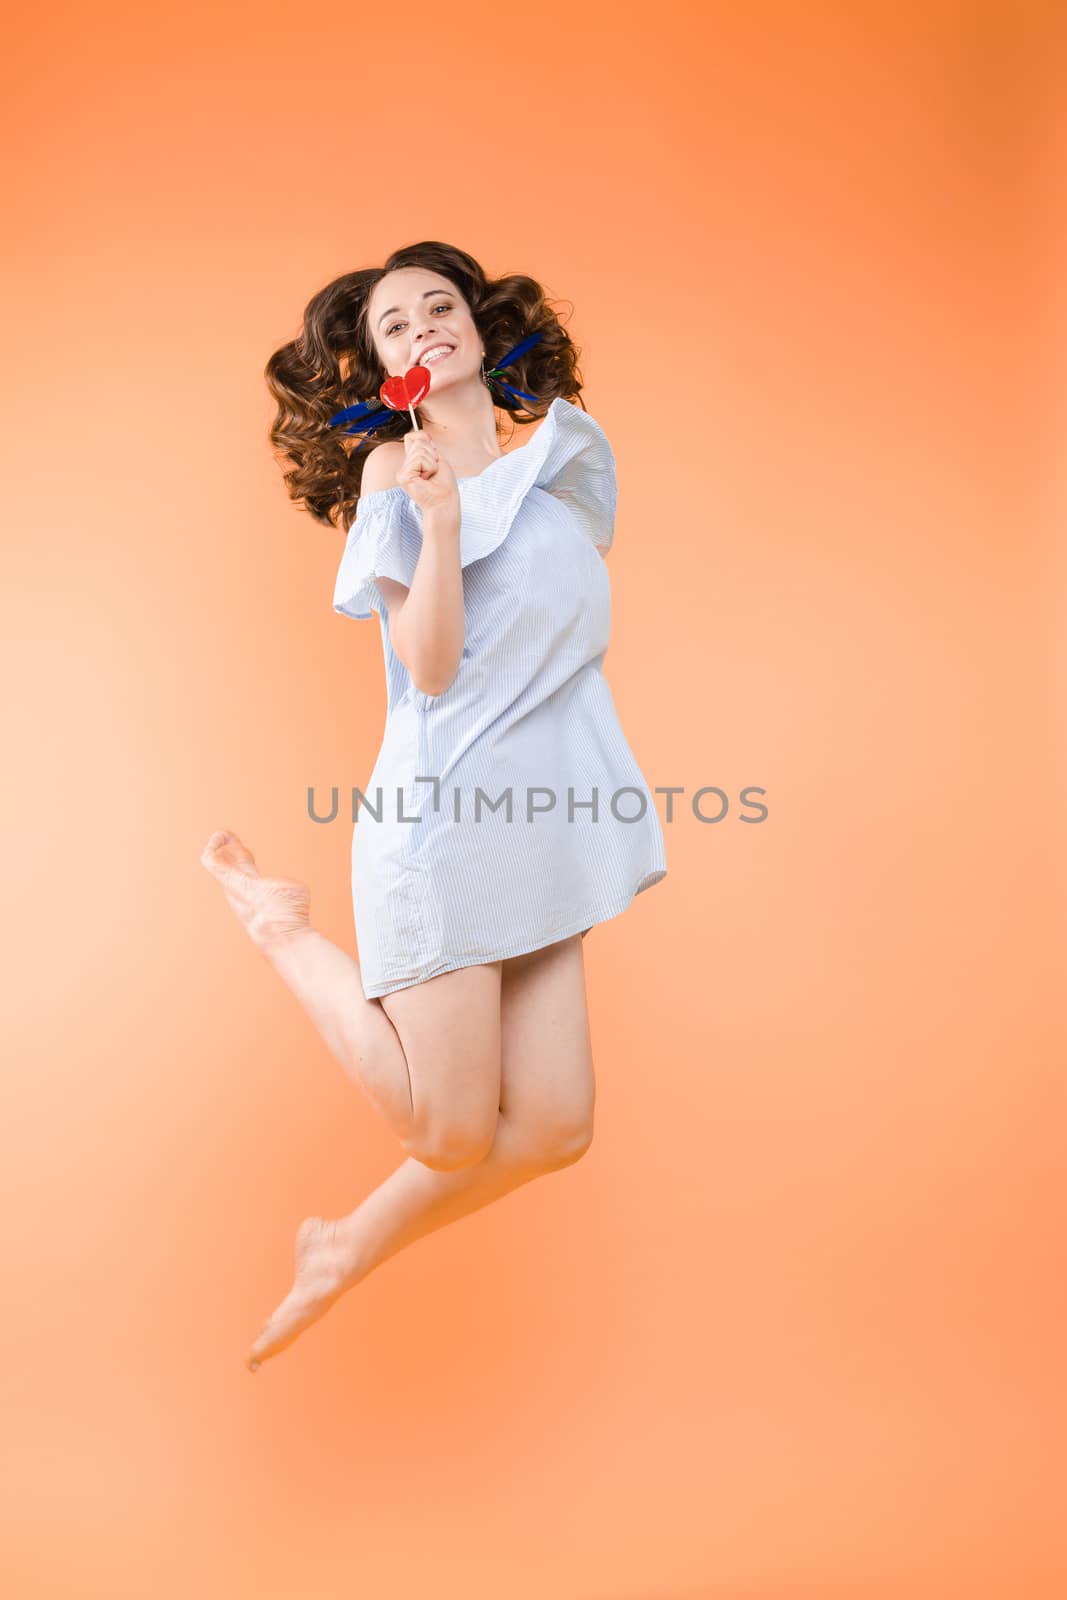 Close up portrait of attractive lovely girl in light dress handing lolipop isolated on yellow background